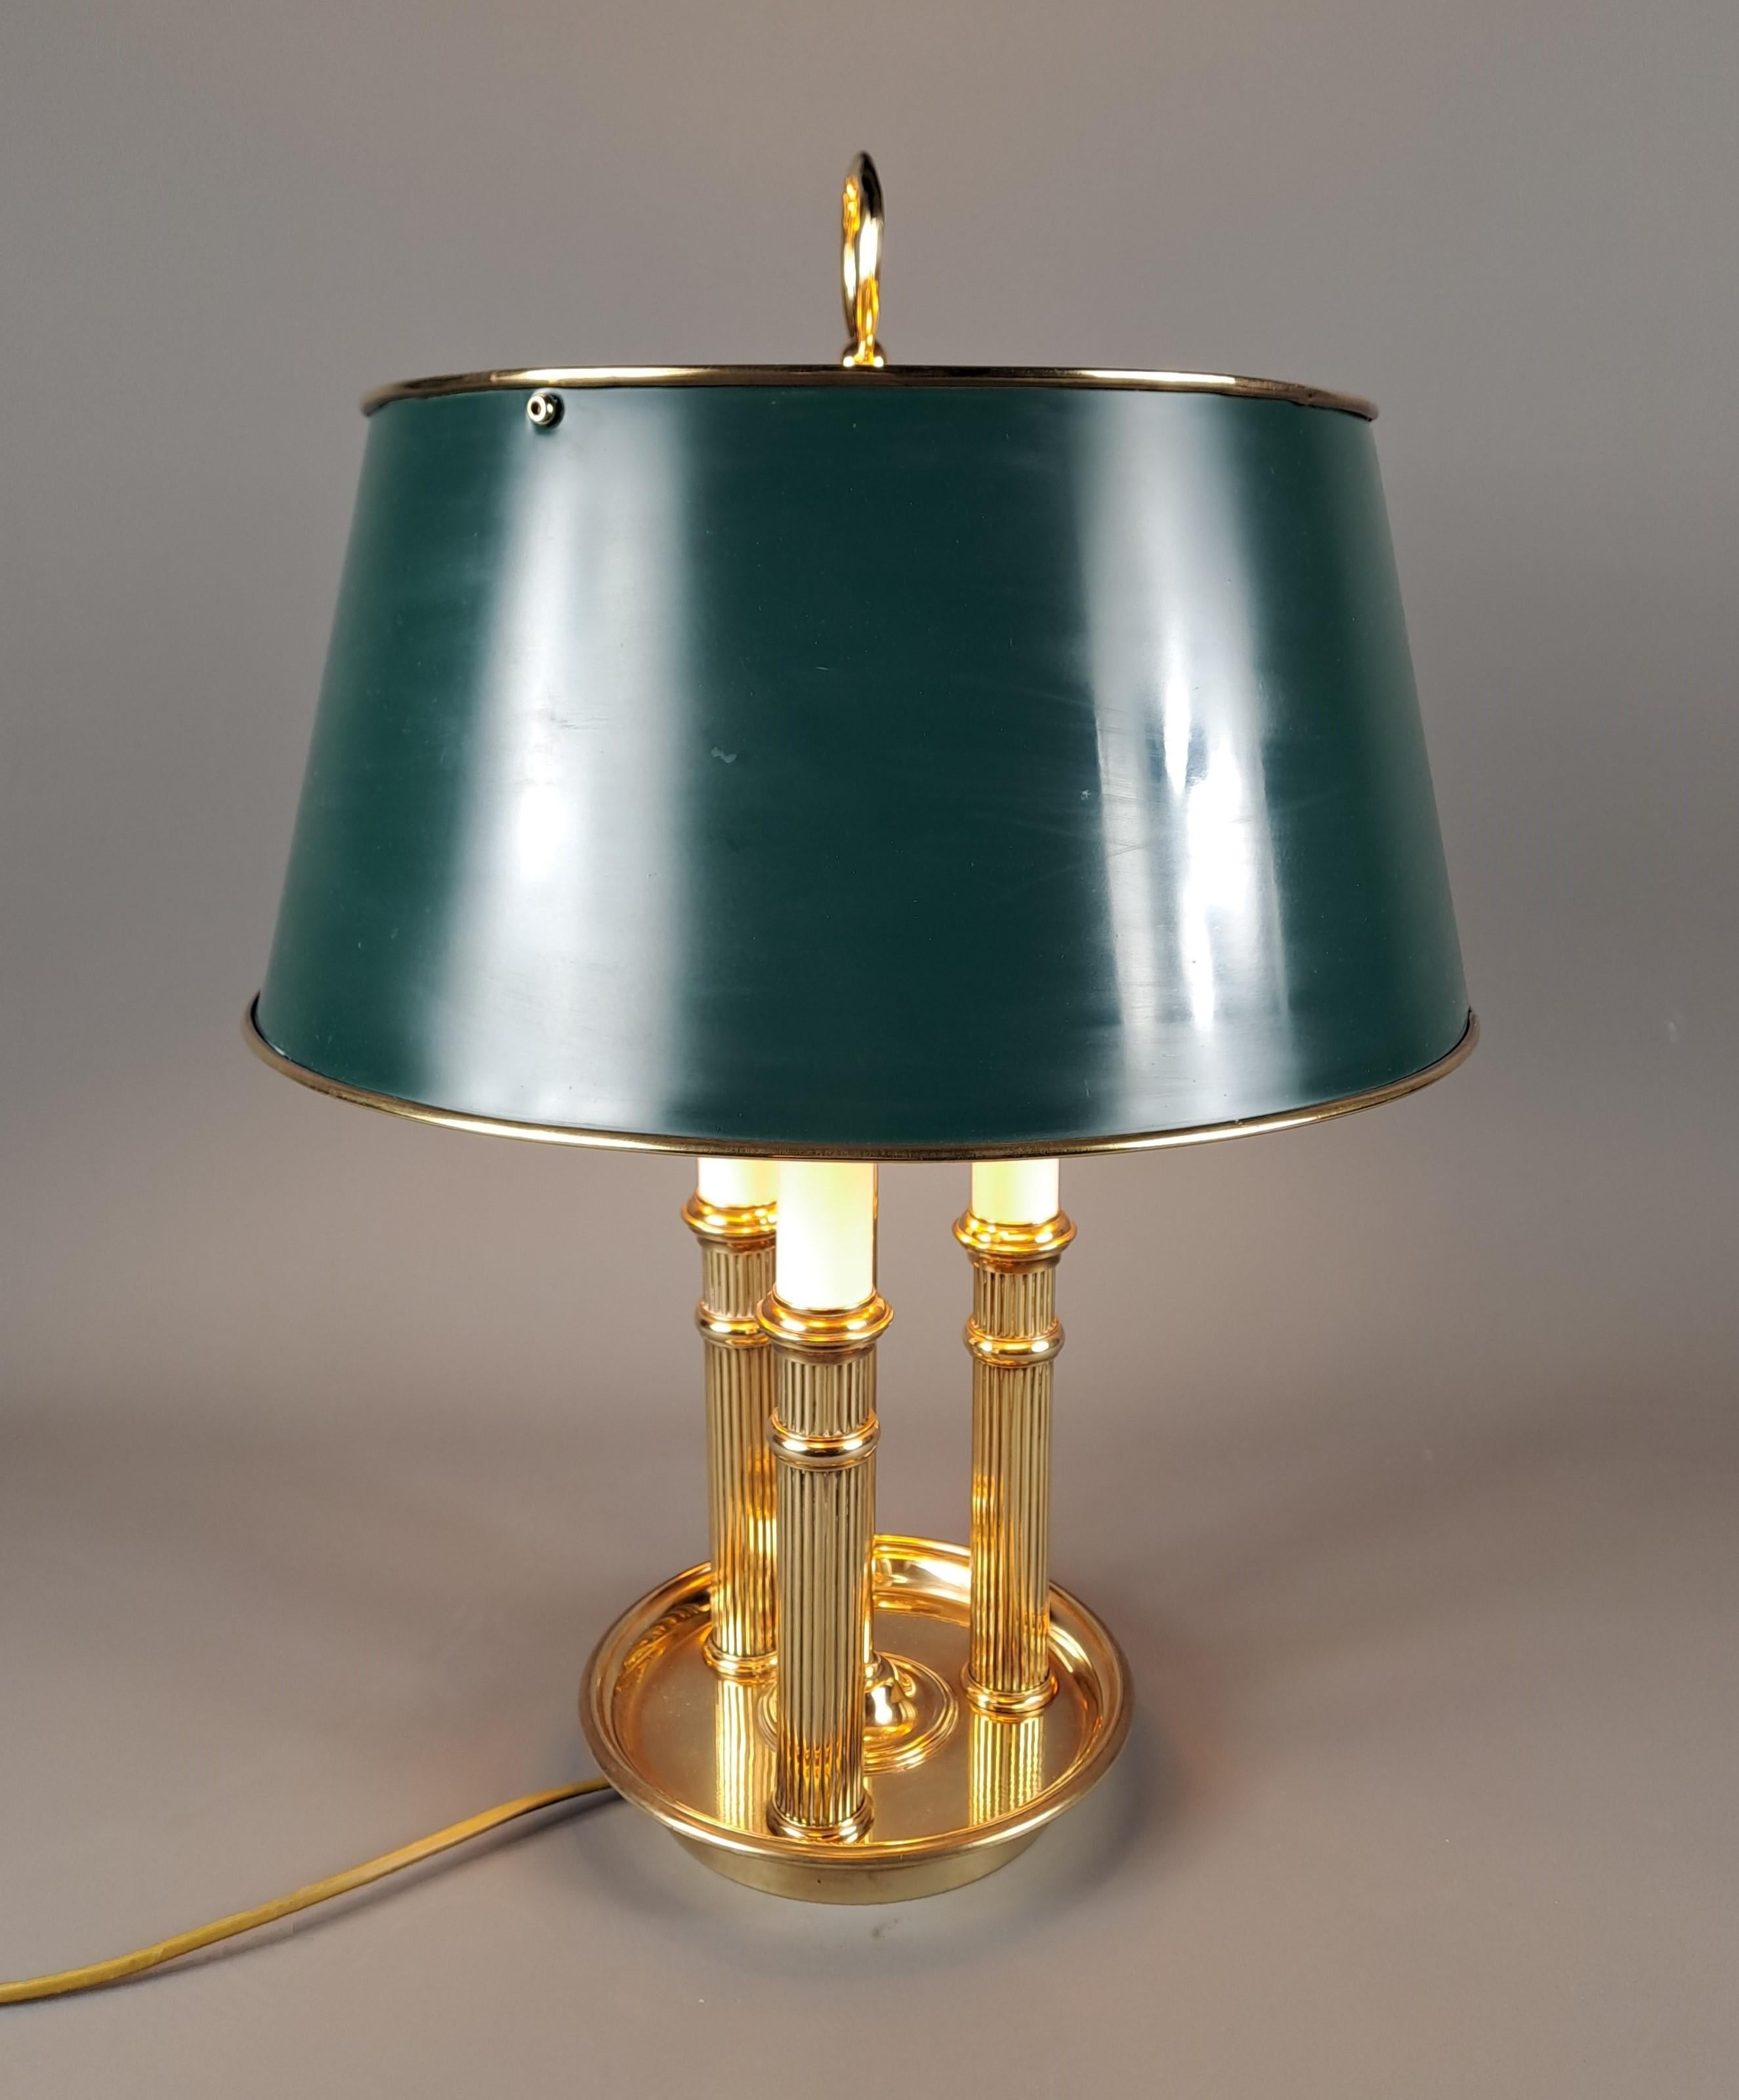 Empire style bouillotte lamp in gilded bronze, with a green lacquered sheet metal shade.
Illuminated by 3 lights.

French work of quality from the 20th century (circa 1950)

Perfect condition, electrification completely redone (EU norms, possibility